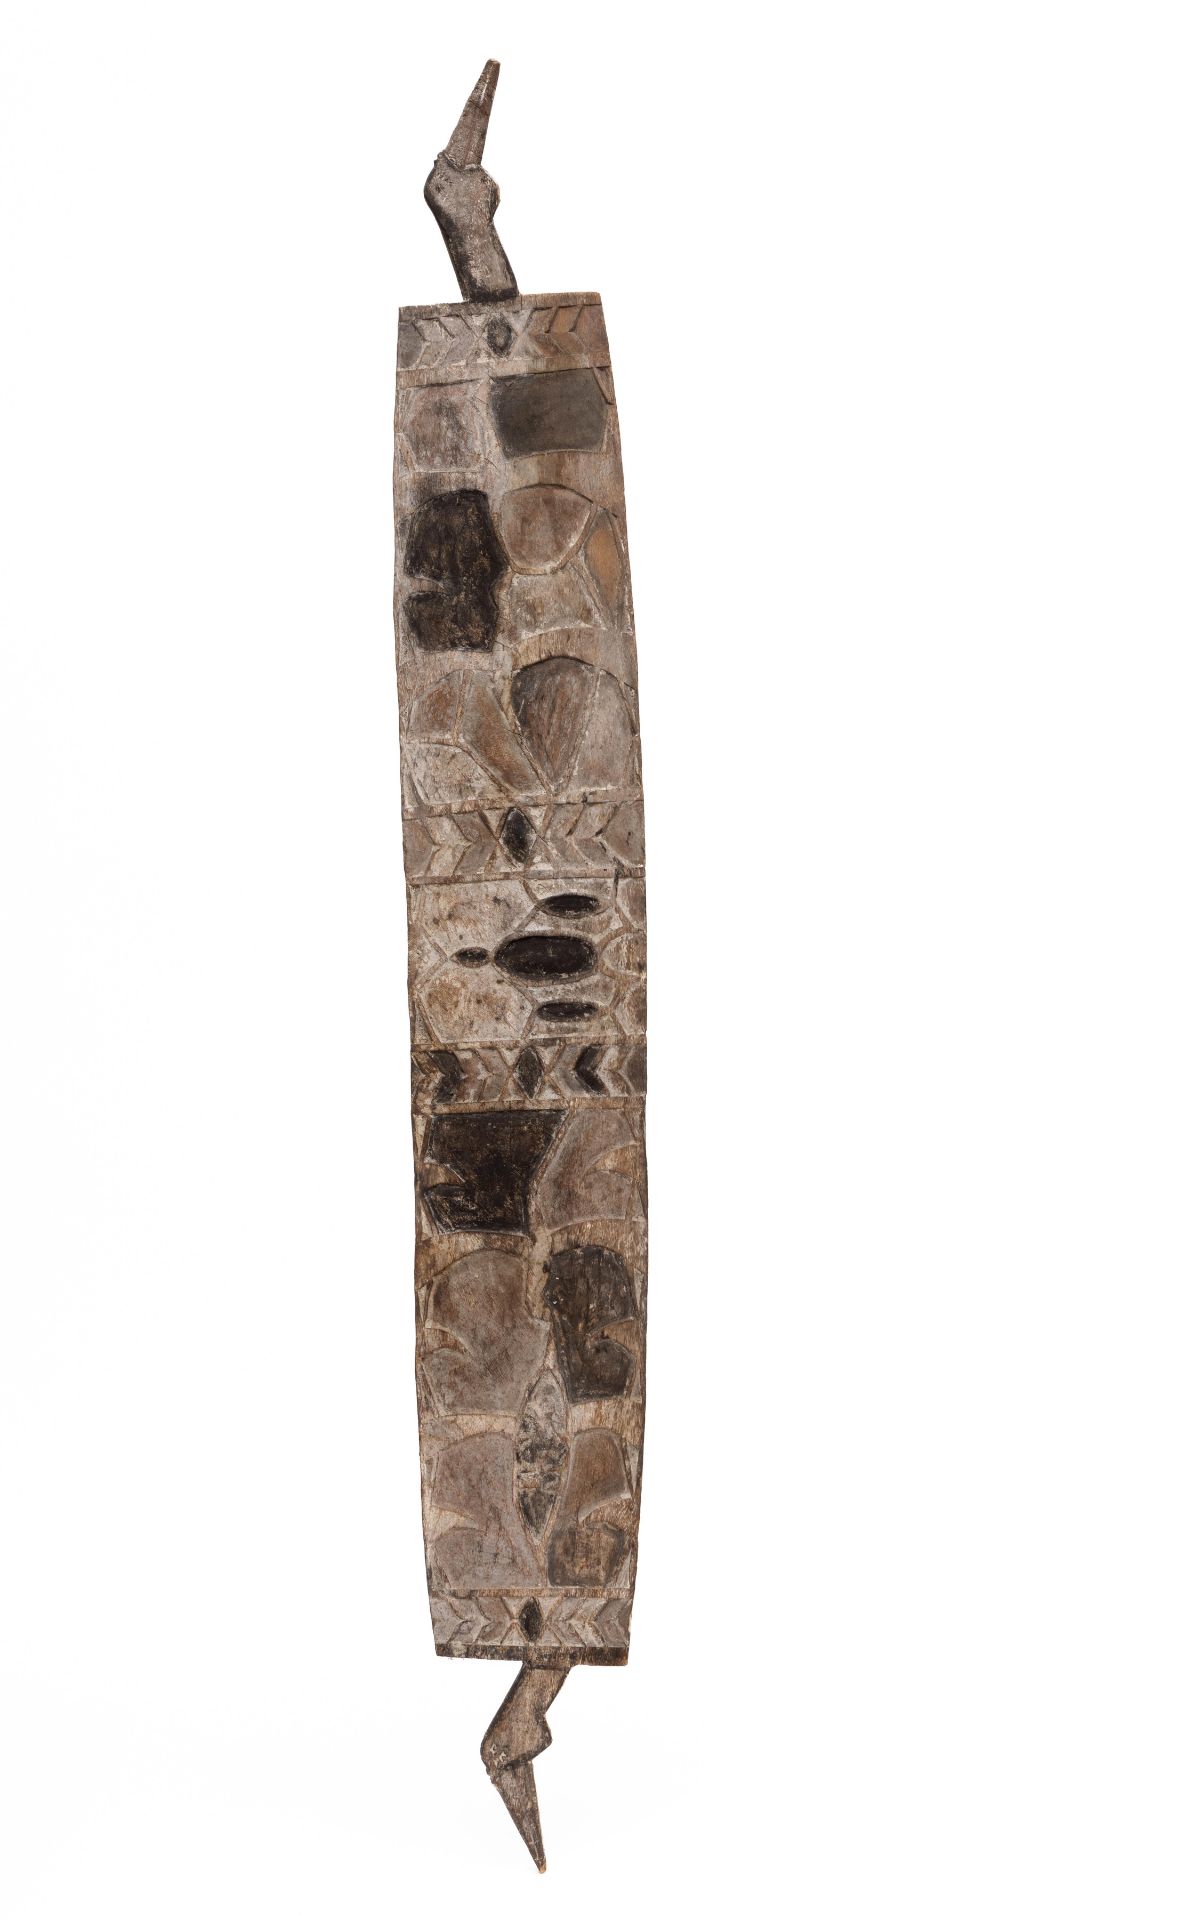 Papua, Kamoro, a carved ceremonial plank, yamate